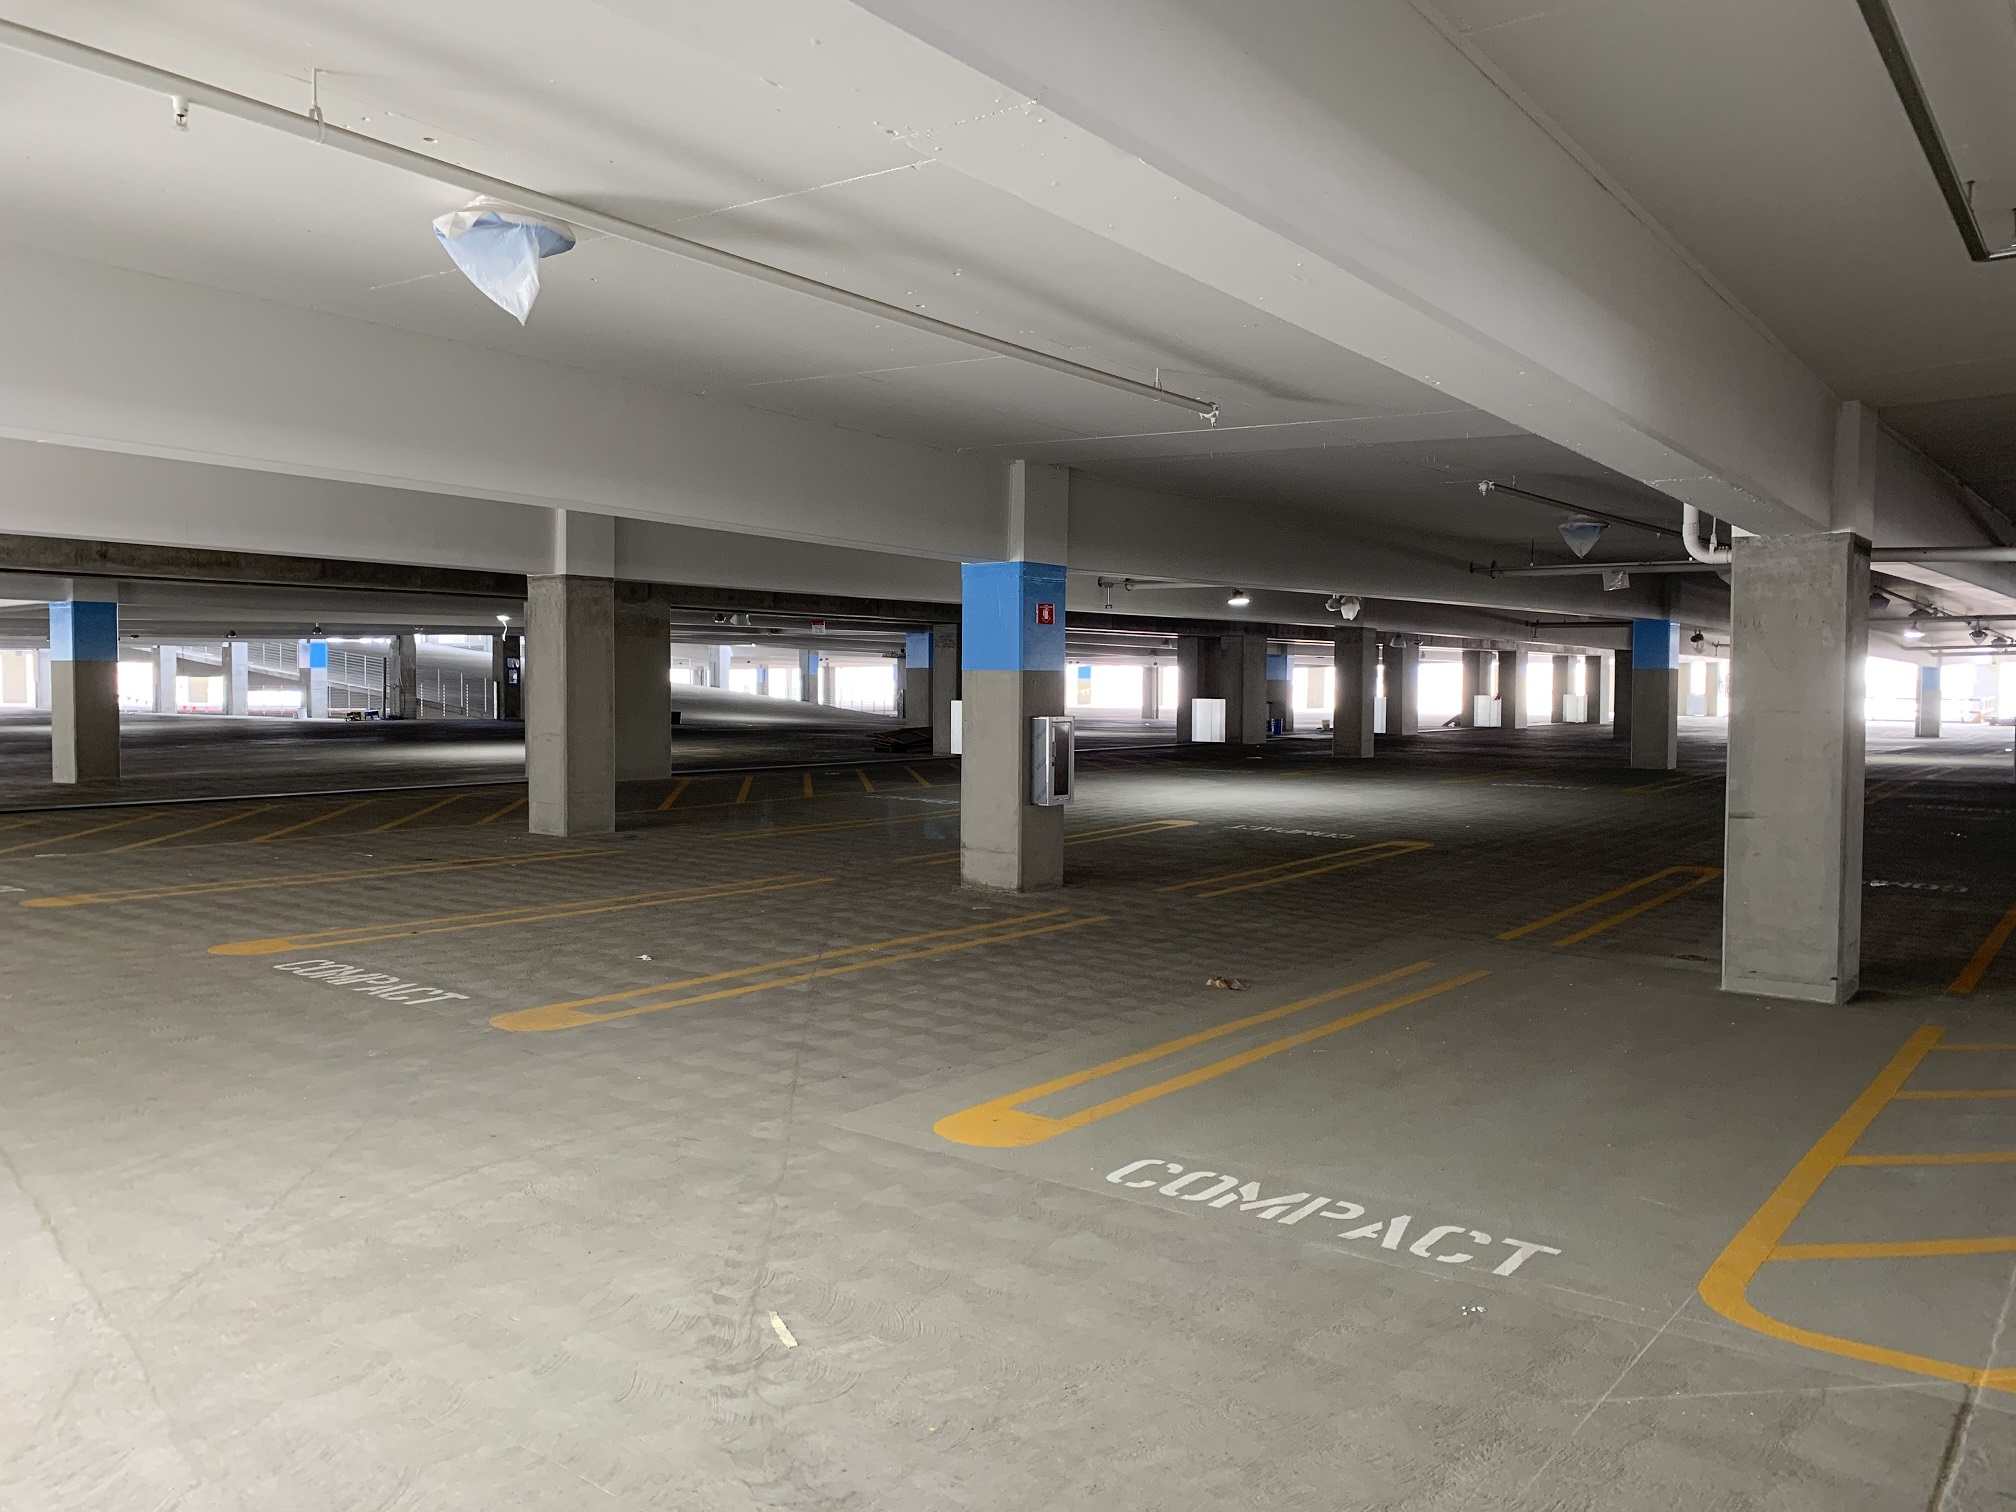 Interior painting for wayfinding and parking spot delineation continues at the Intermodal Transportation Facility-West.